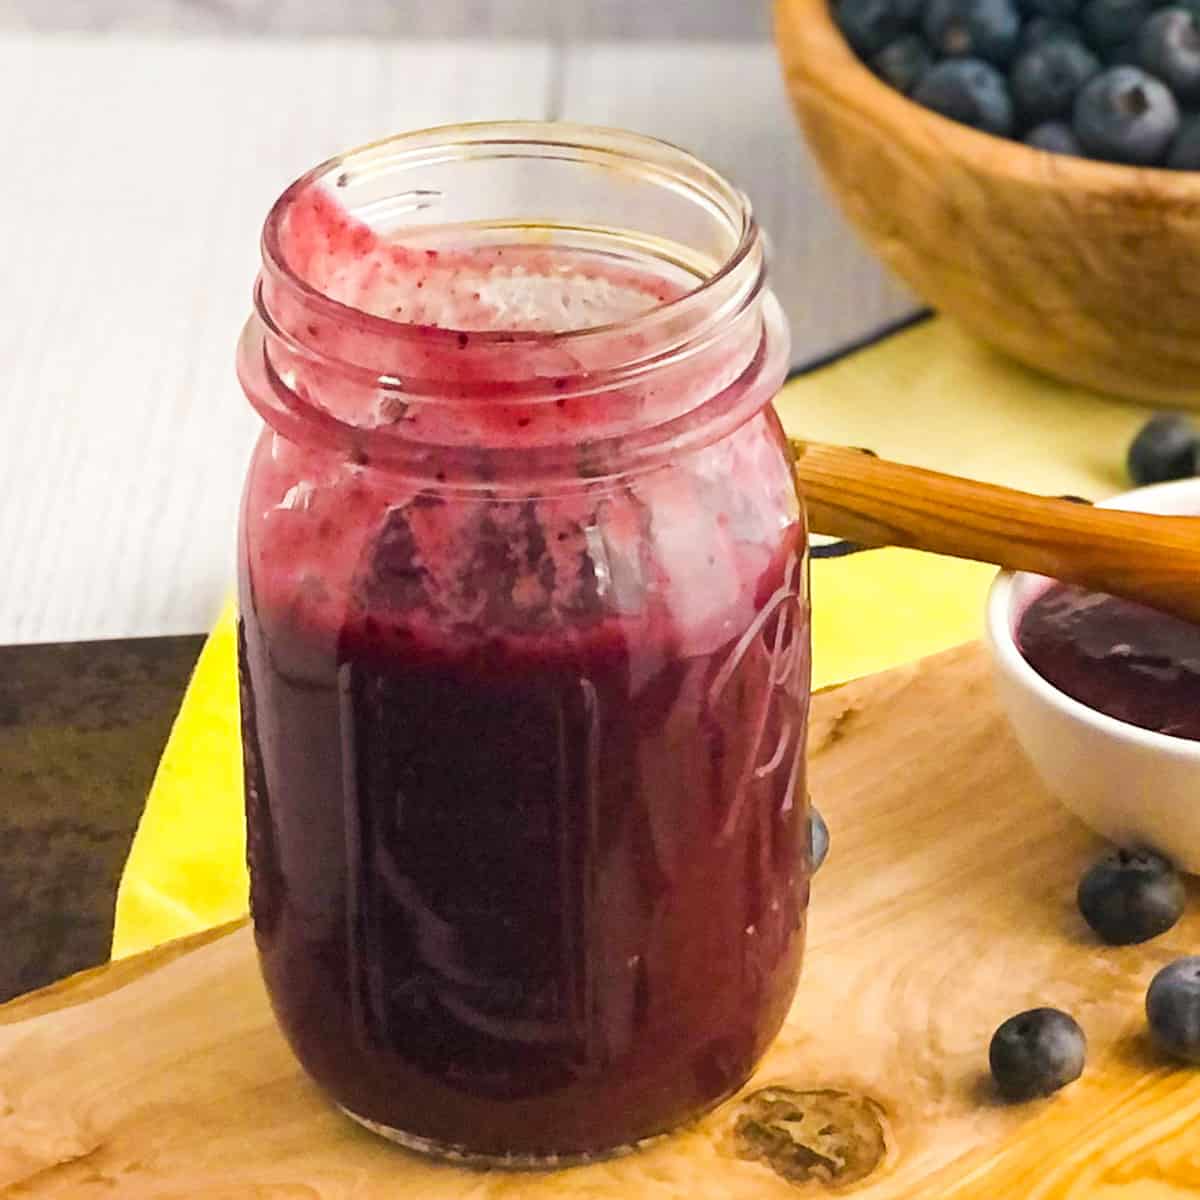 Blueberry sauce in a canning jar with bowl of blueberries in the background.